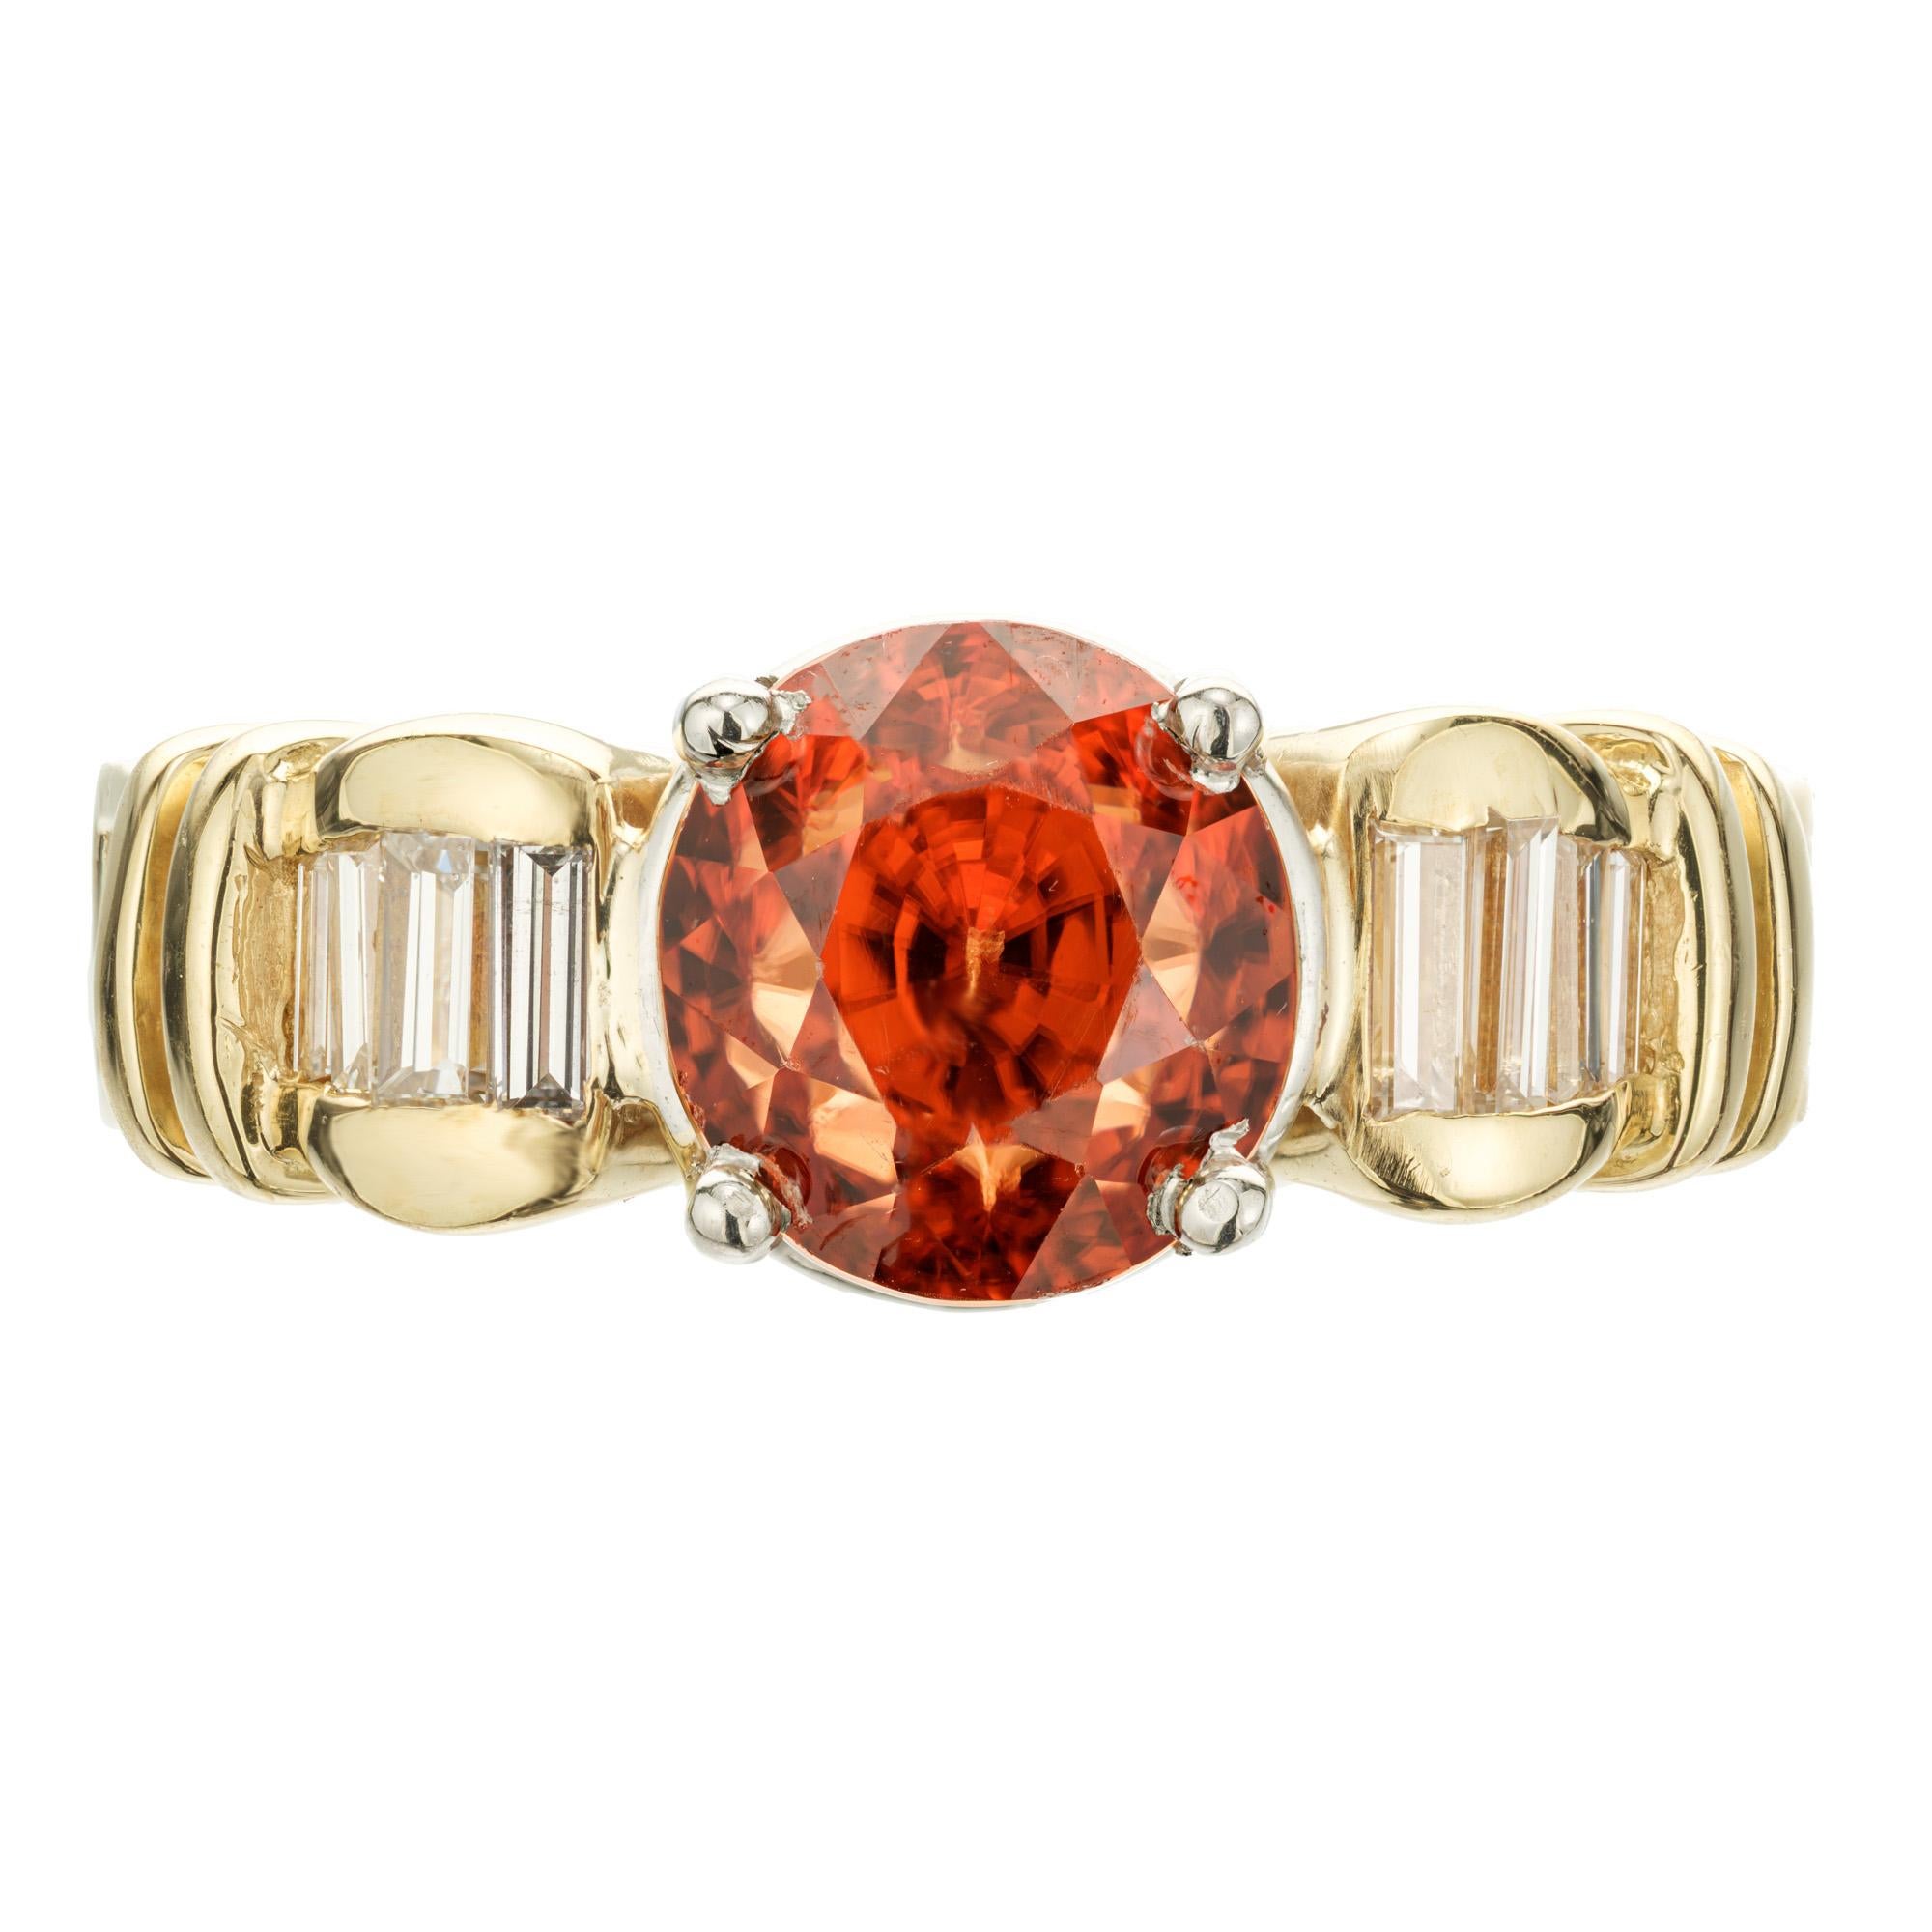 Zircon and diamond engagement ring. GIA certified 5.16ct orange cushion cut Zircon set in 18k yellow gold setting with a platinum crown. 14 baguette cut accent diamonds. GIA certified natural untreated Zircon.

1 cushion orange Zircon, approx. total